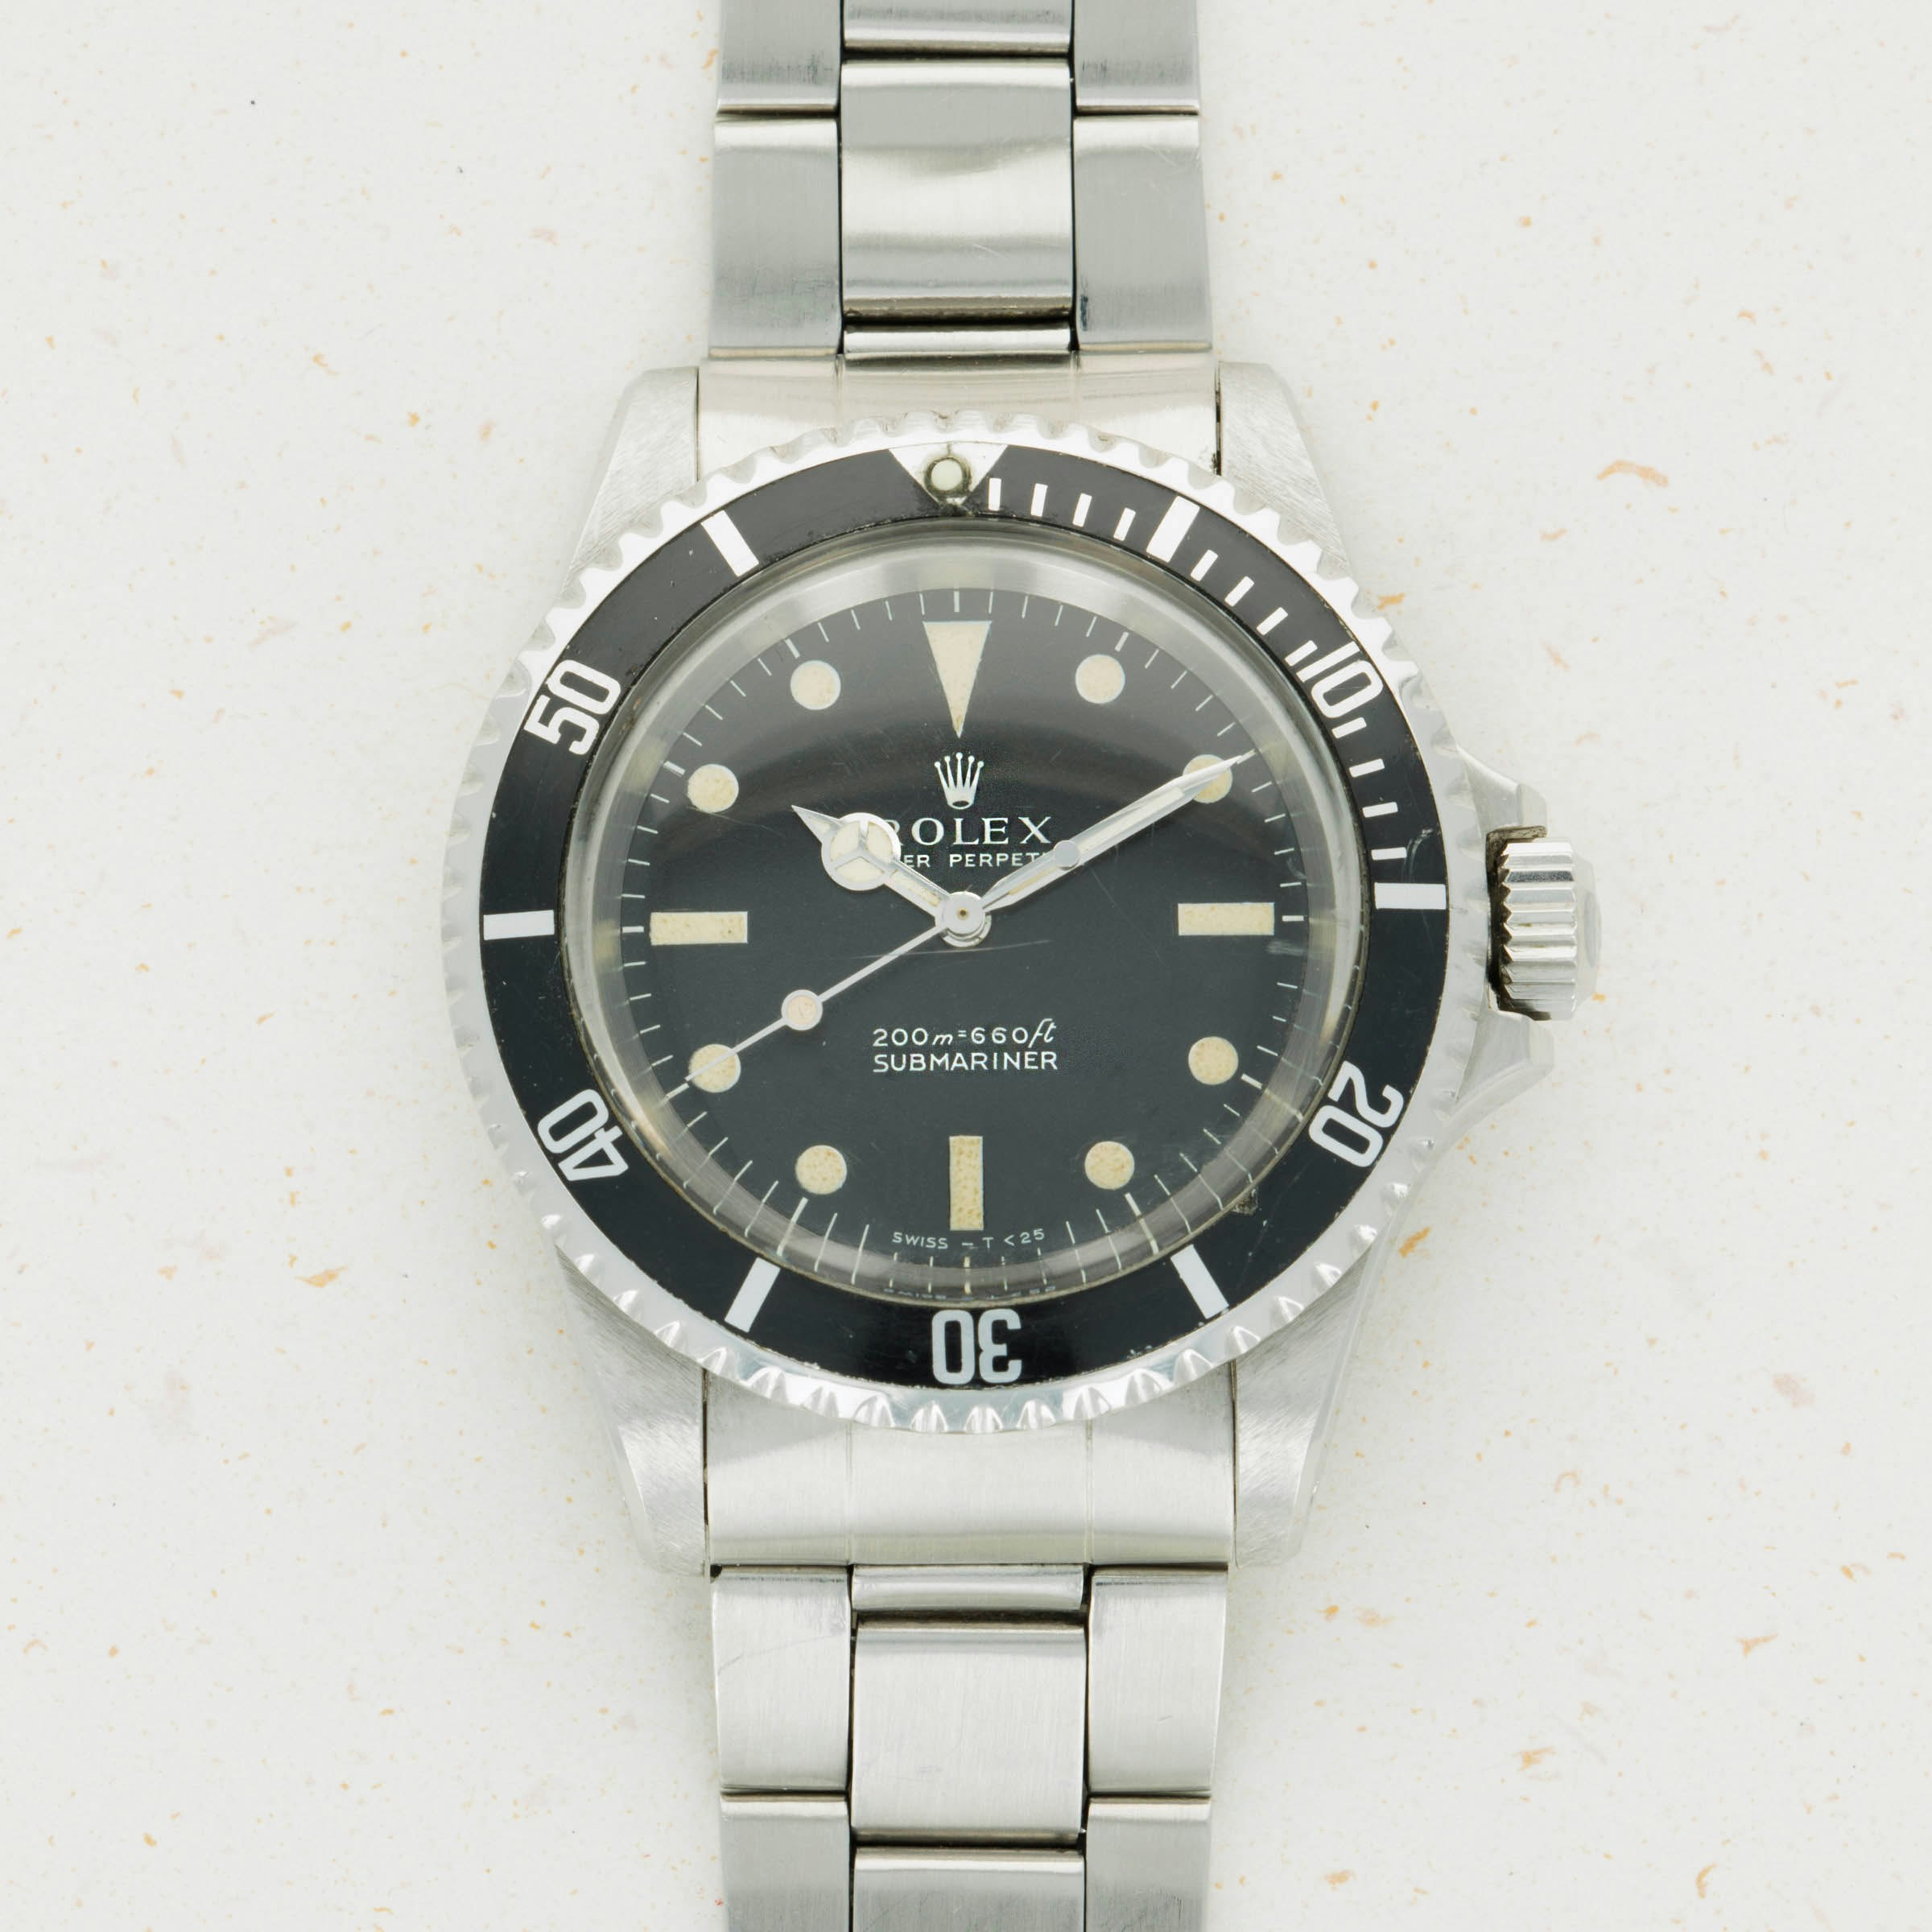 Thumbnail for Rolex Submariner 5513 Meters First Dial